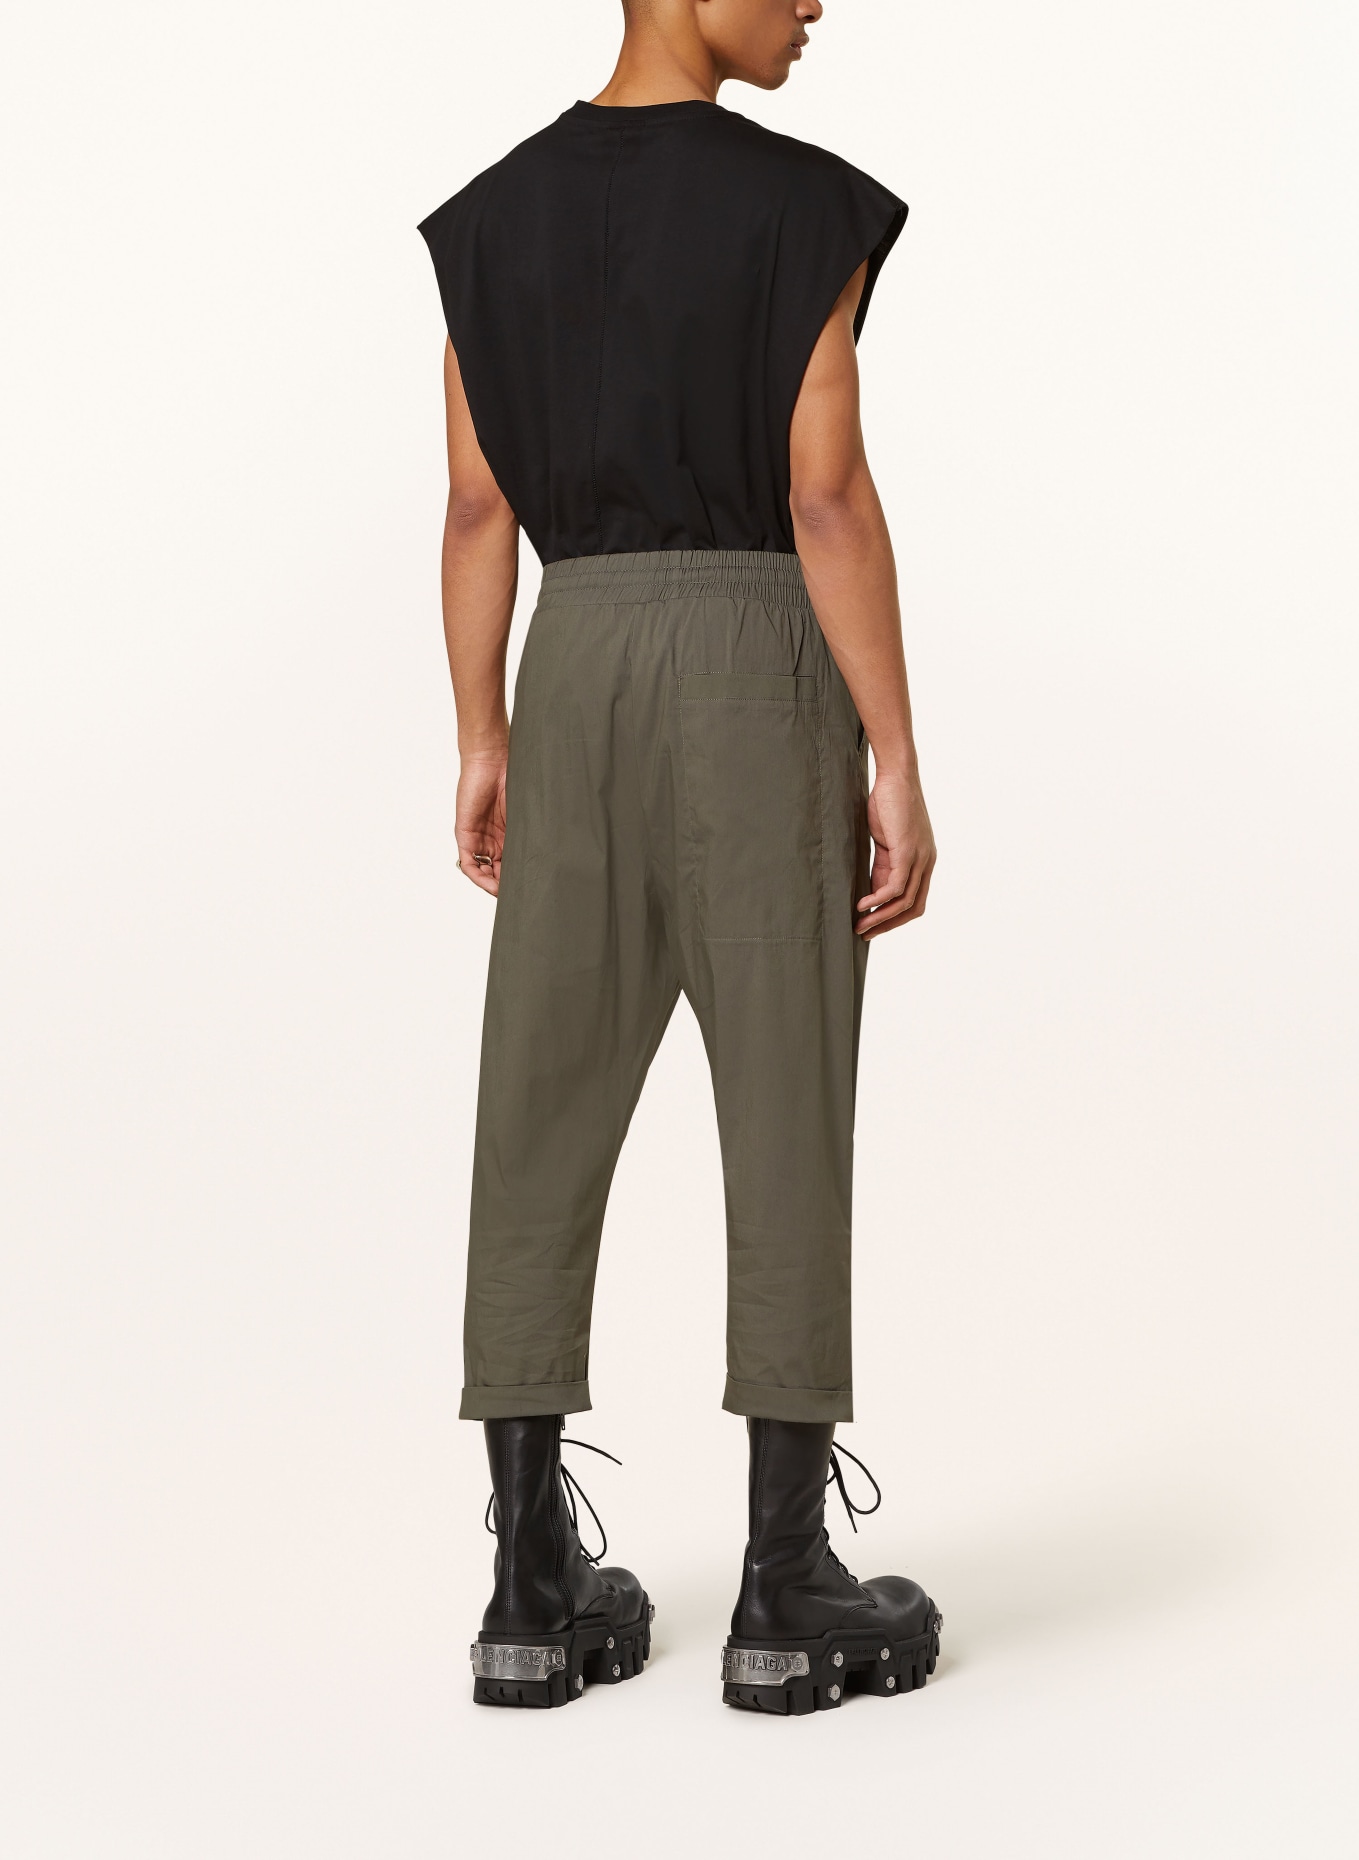 thom/krom Pants in jogger style slim fit, Color: KHAKI (Image 3)